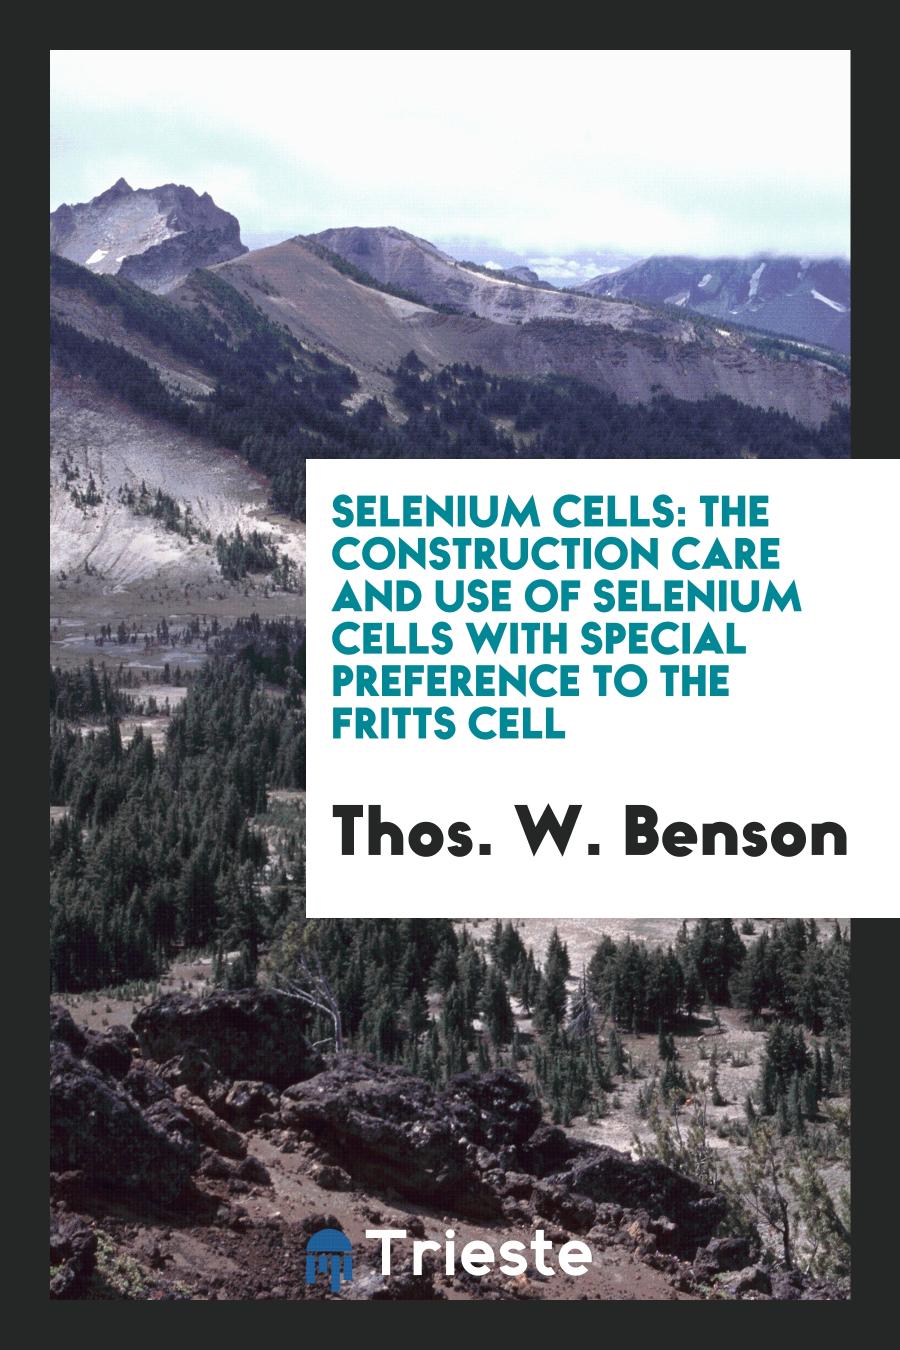 Selenium Cells: The Construction Care and Use of Selenium Cells with Special preference to the fritts cell